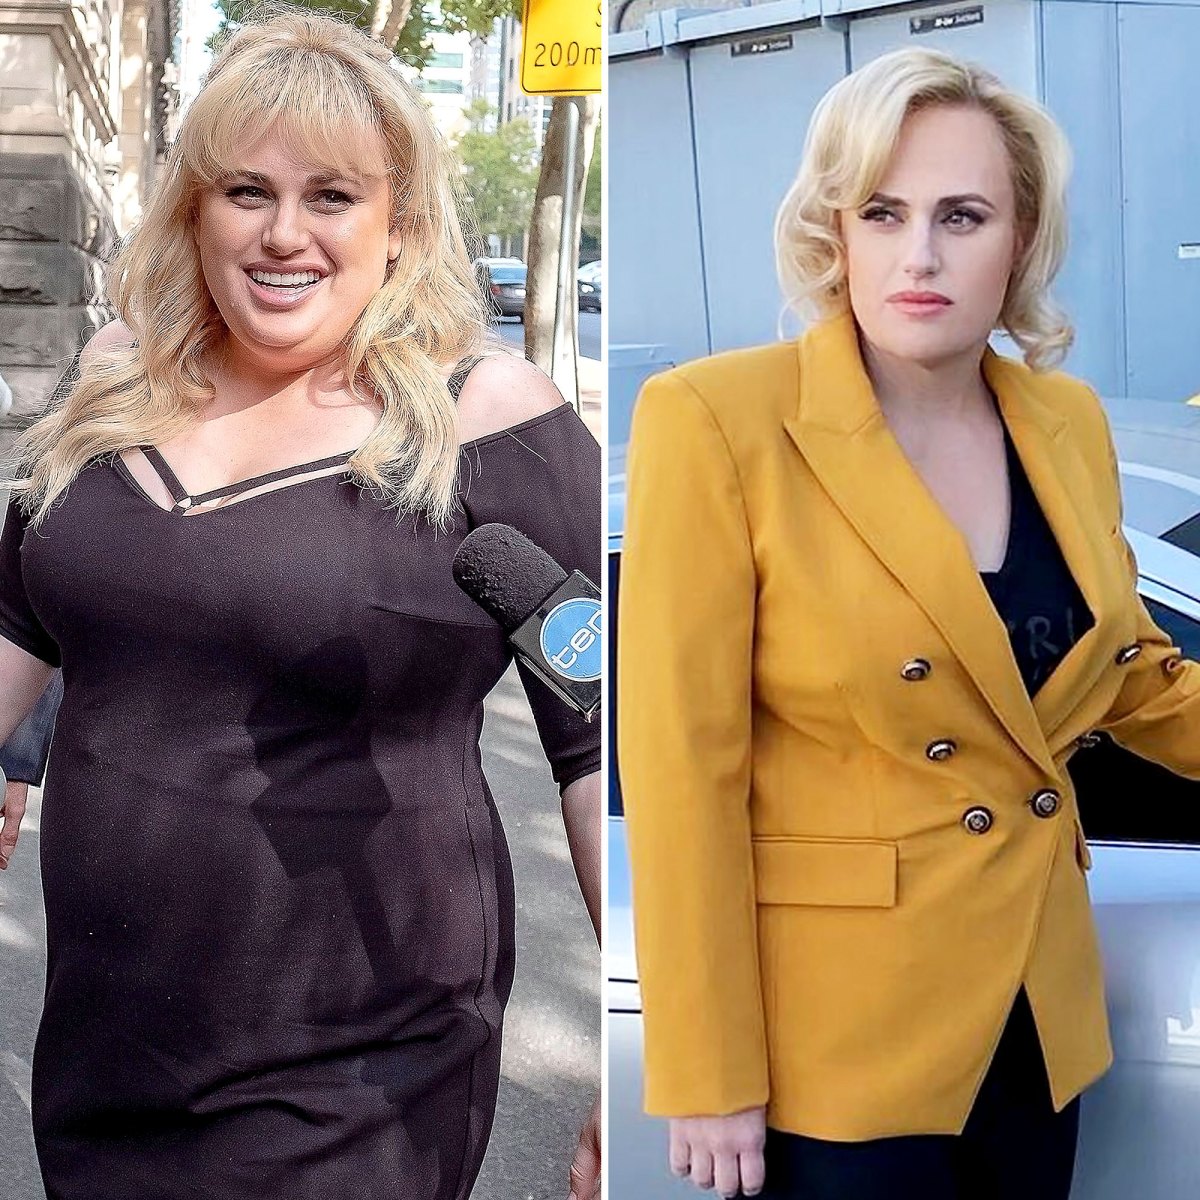 Rebel Wilson Feels 'So Proud' of Her Weight Loss Transformation